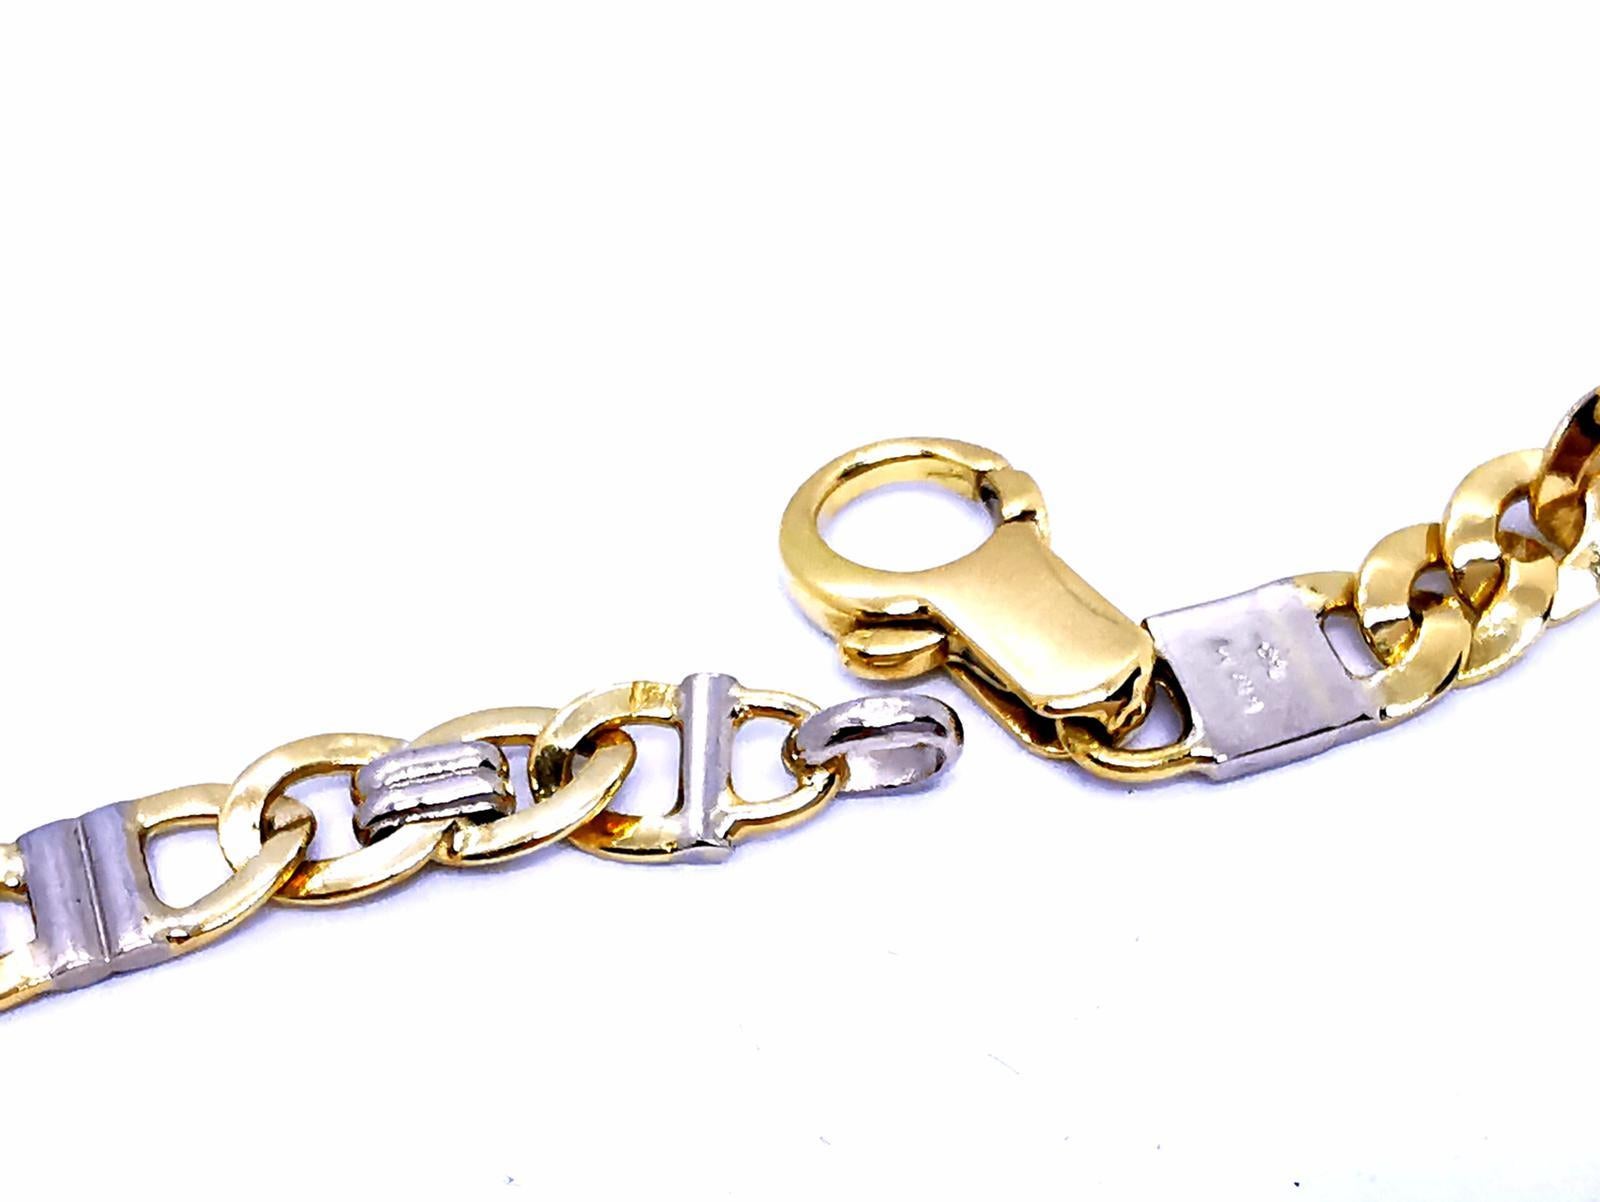 articulated link chain